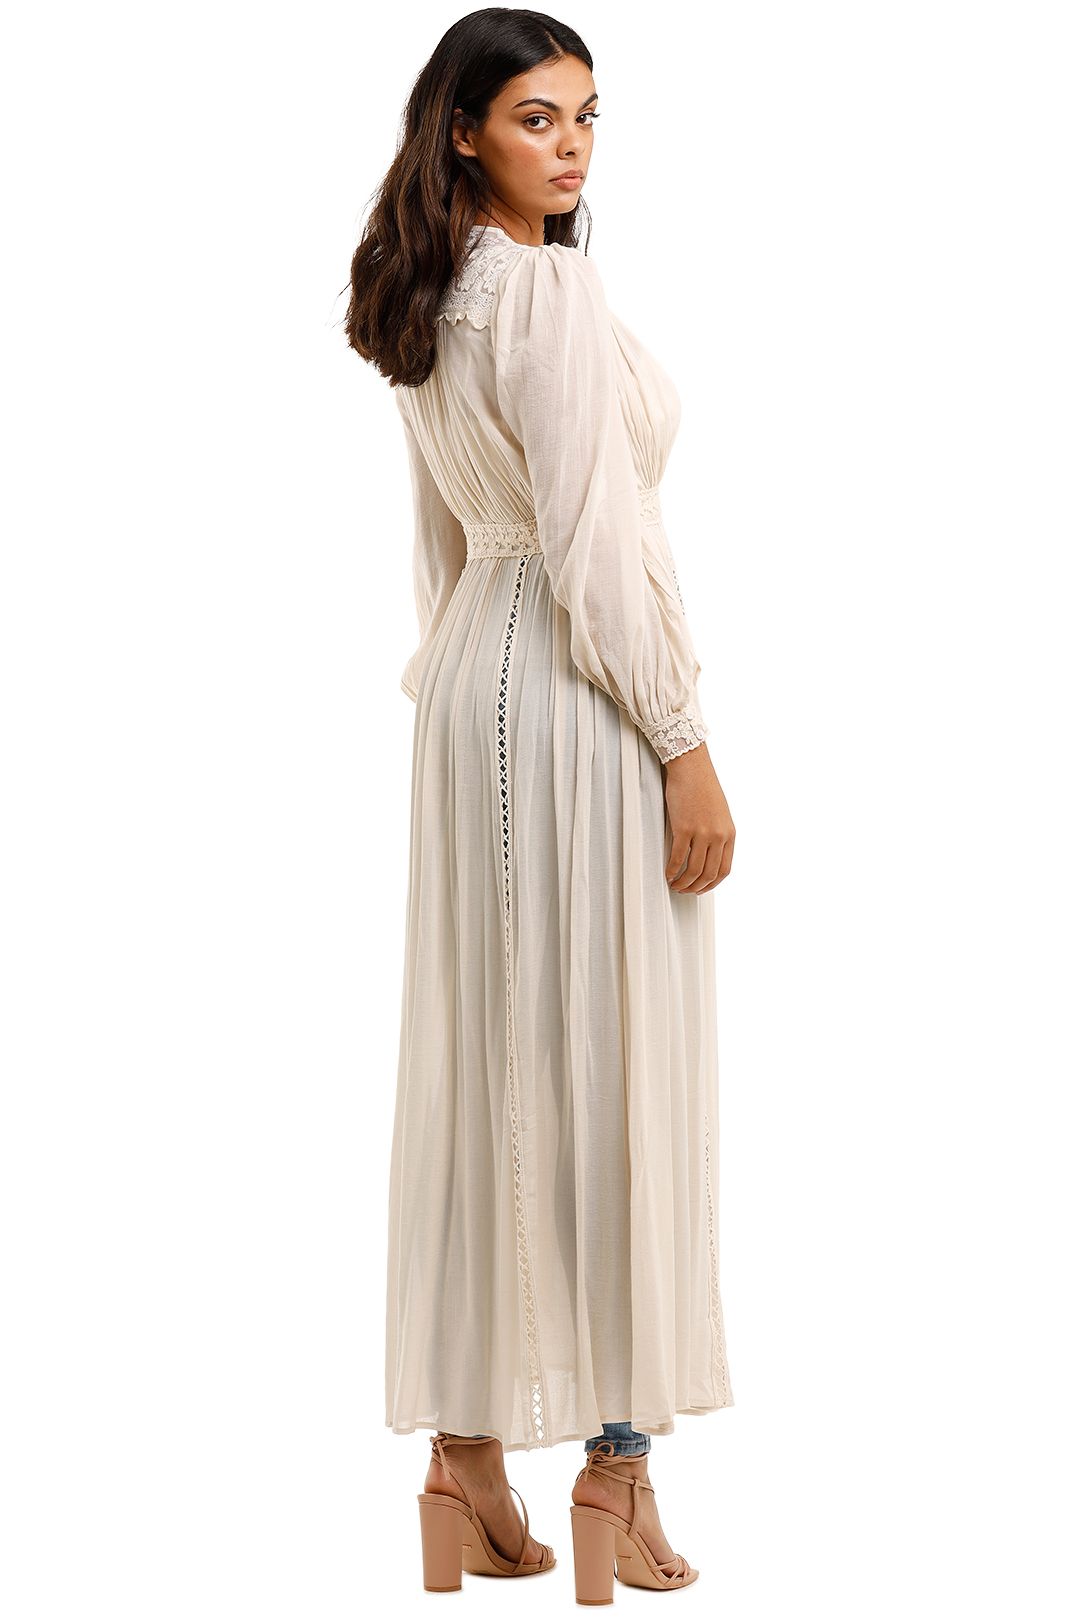 Spell Le Gauze Lace Duster Maxi Length